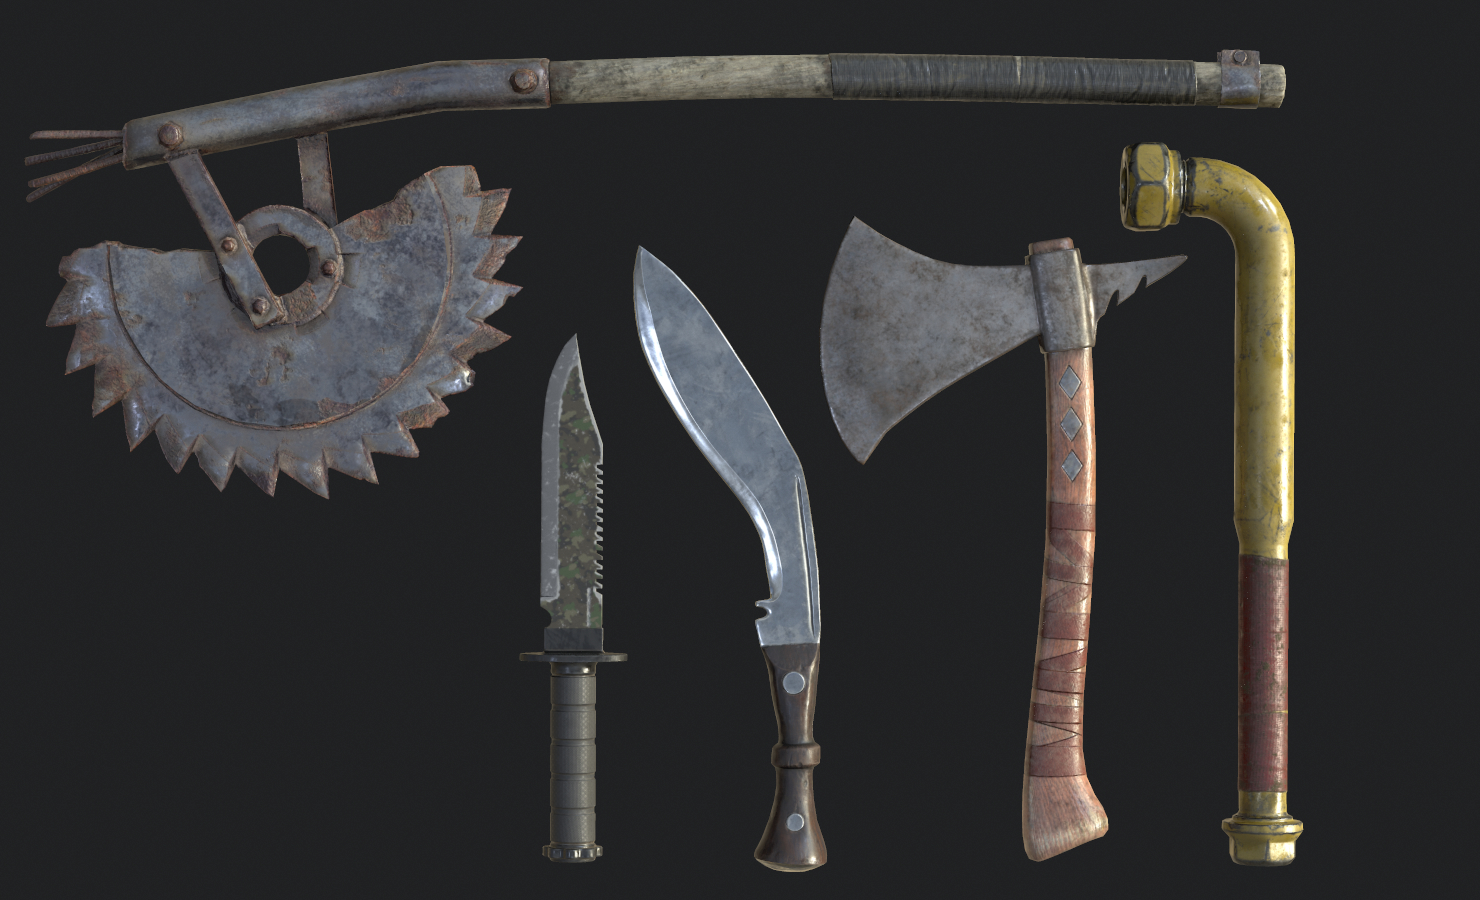 melee weapons on automatrons